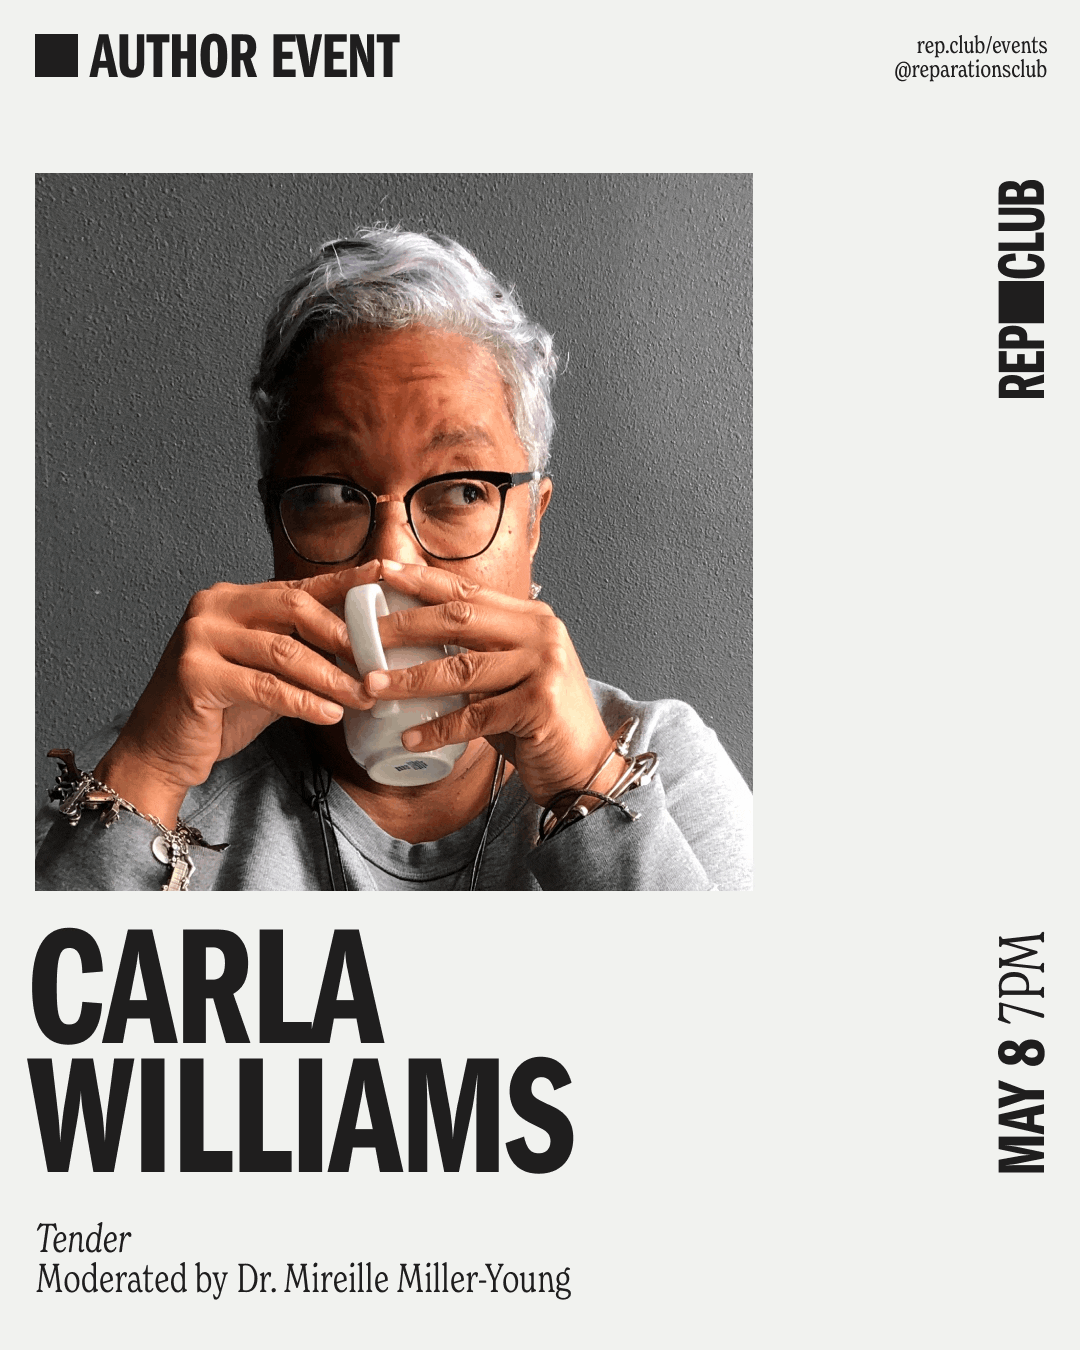 May 8th EVENT: Tender // Carla Williams + Dr. Mireille Miller-Young